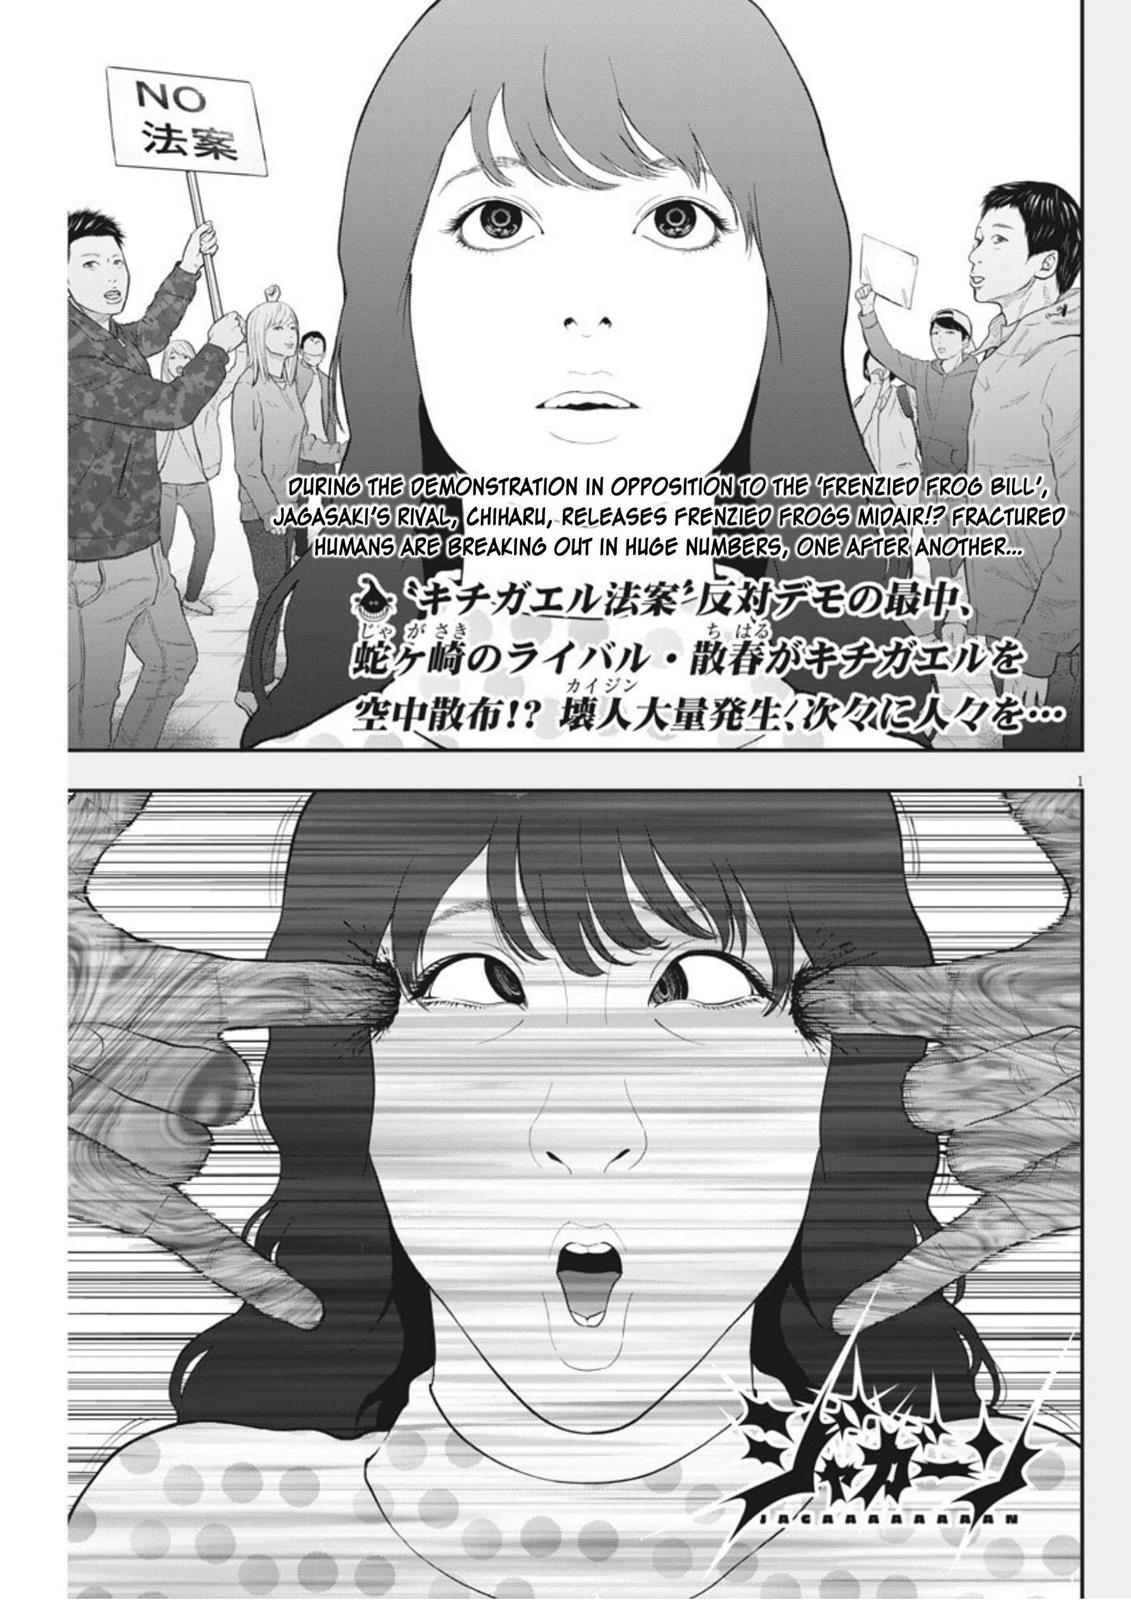  Chapter 41 image 001